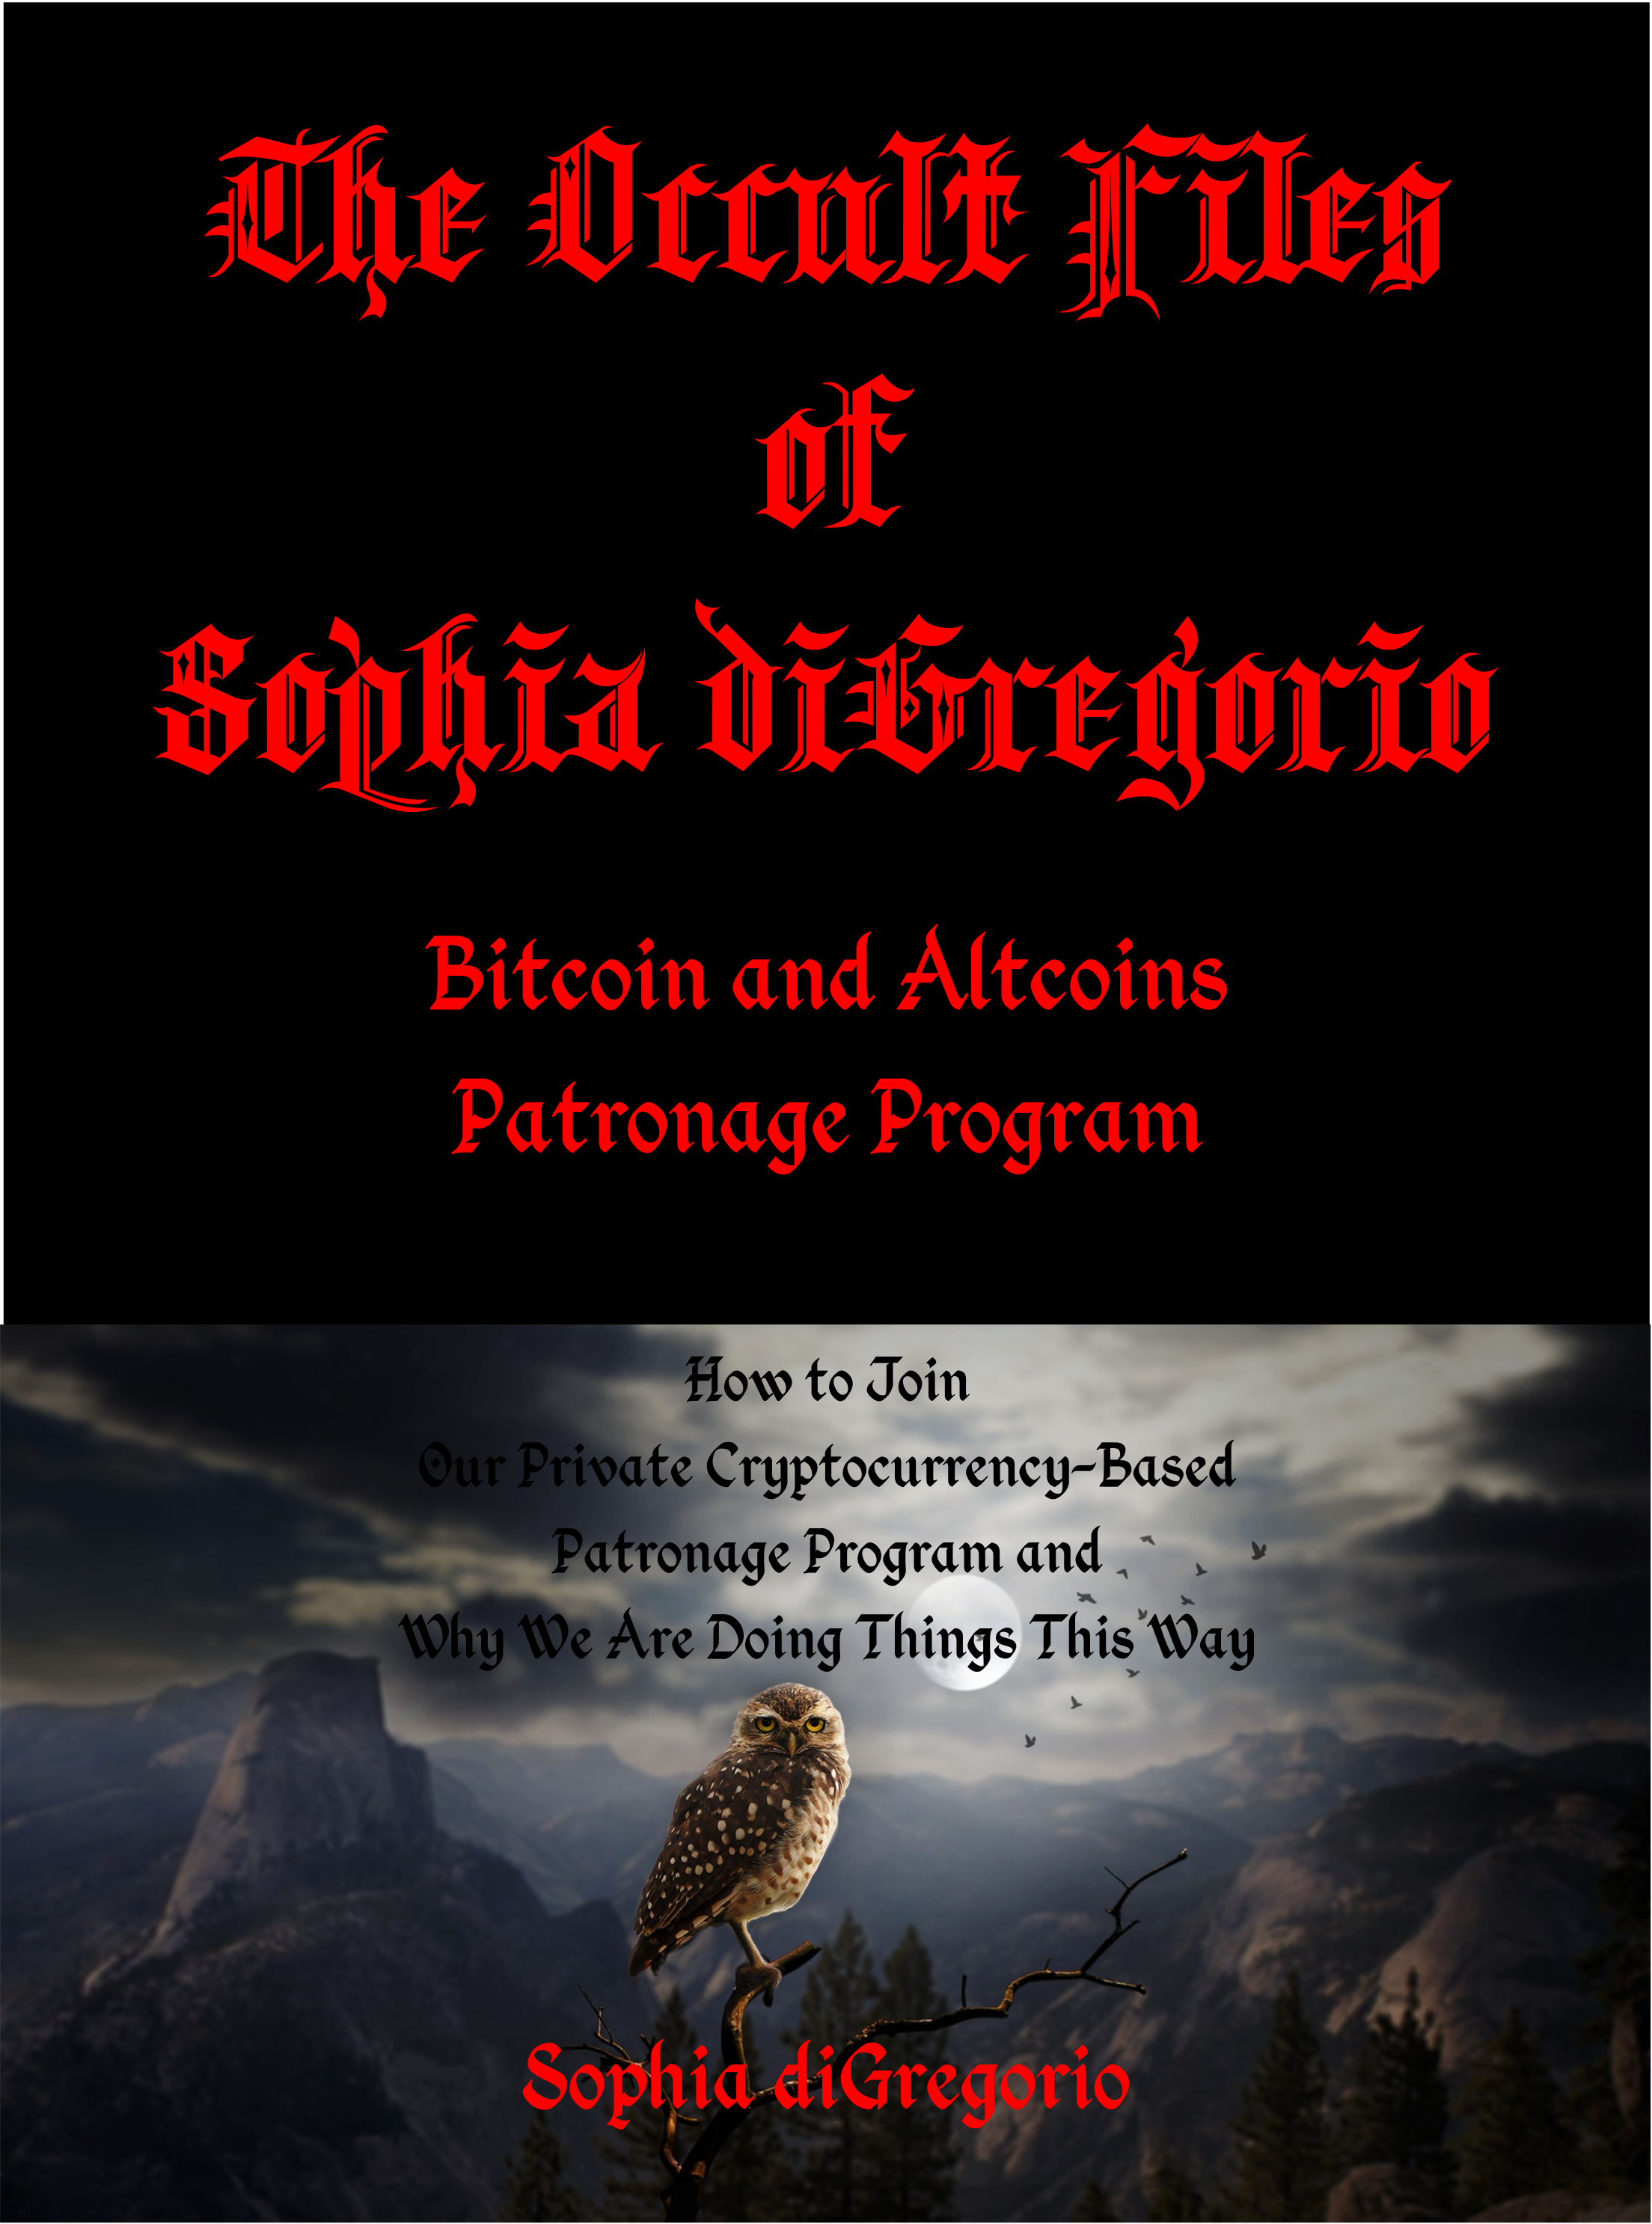 The Occult Files of Sophia diGregorio Bitcoin and Altcoins Patronage Program